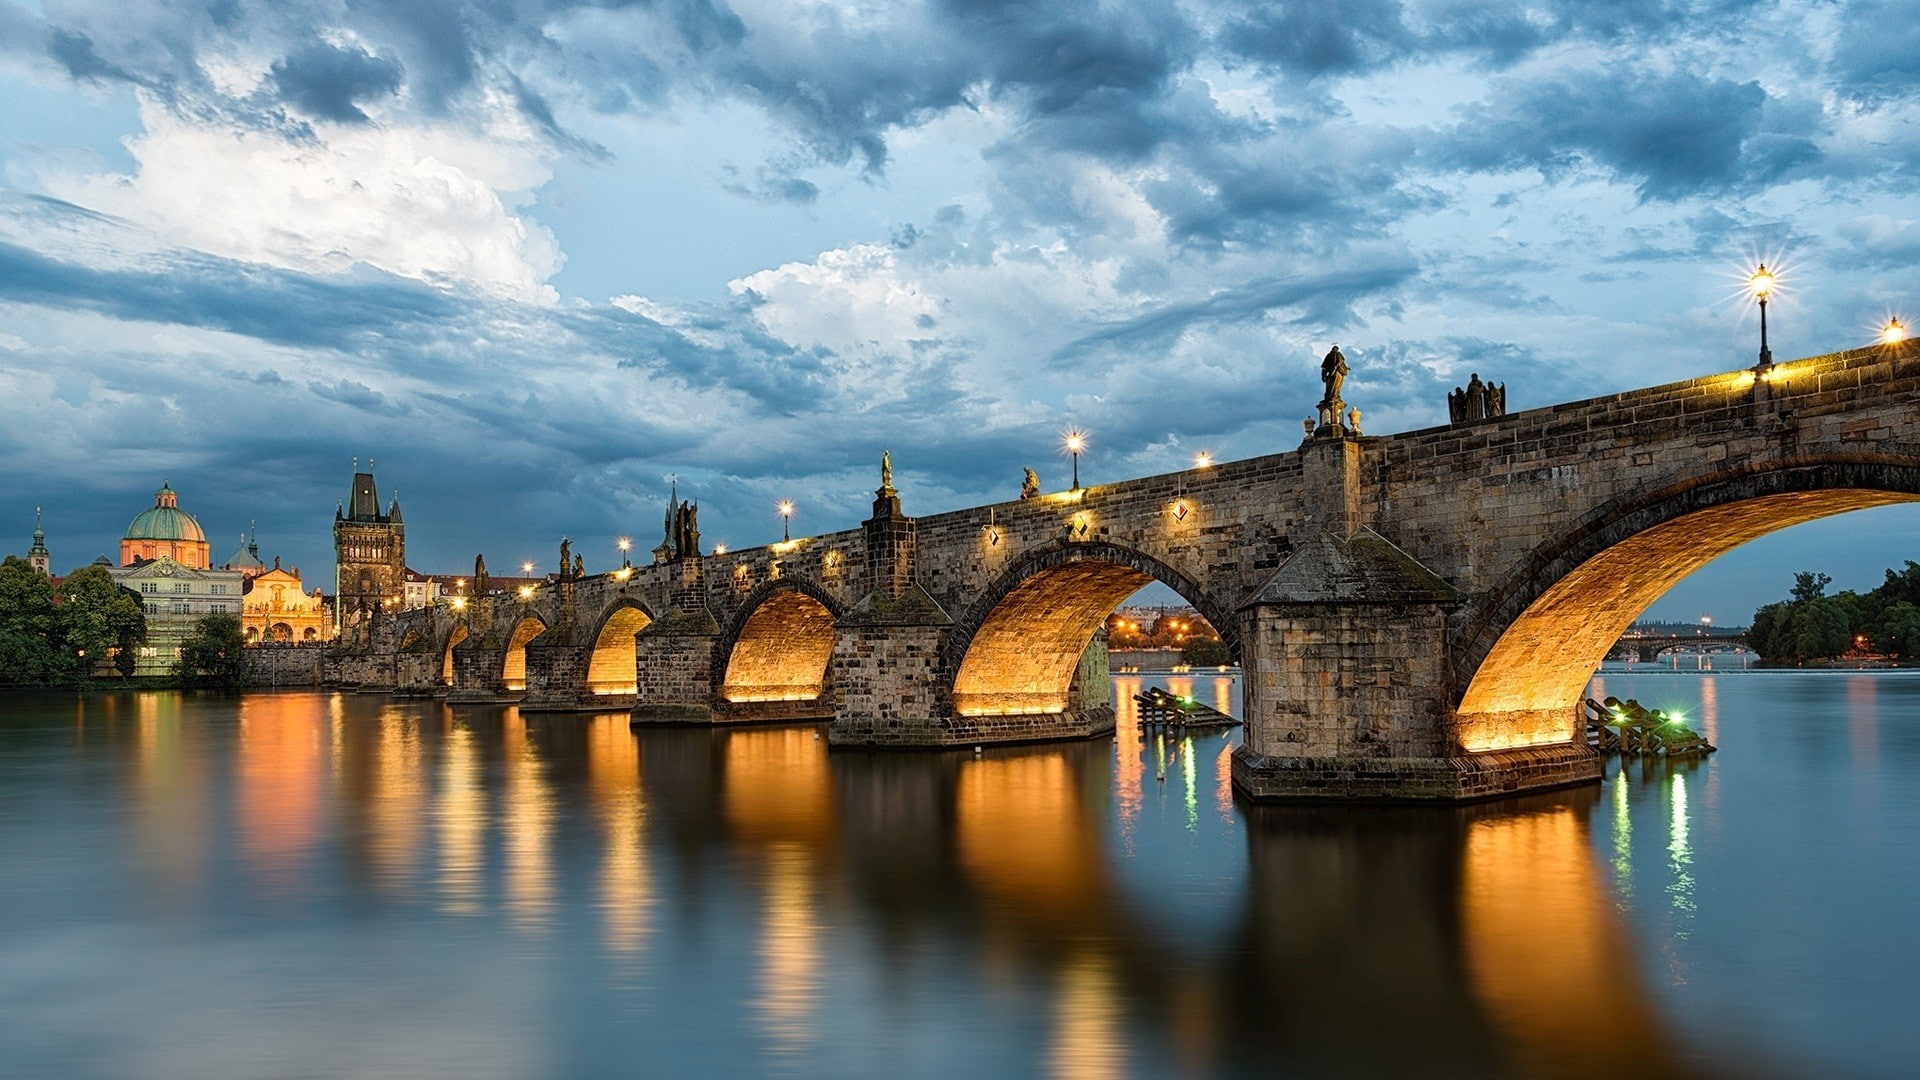 Charles Bridge, tower, cathedral, building, cityscape, clouds